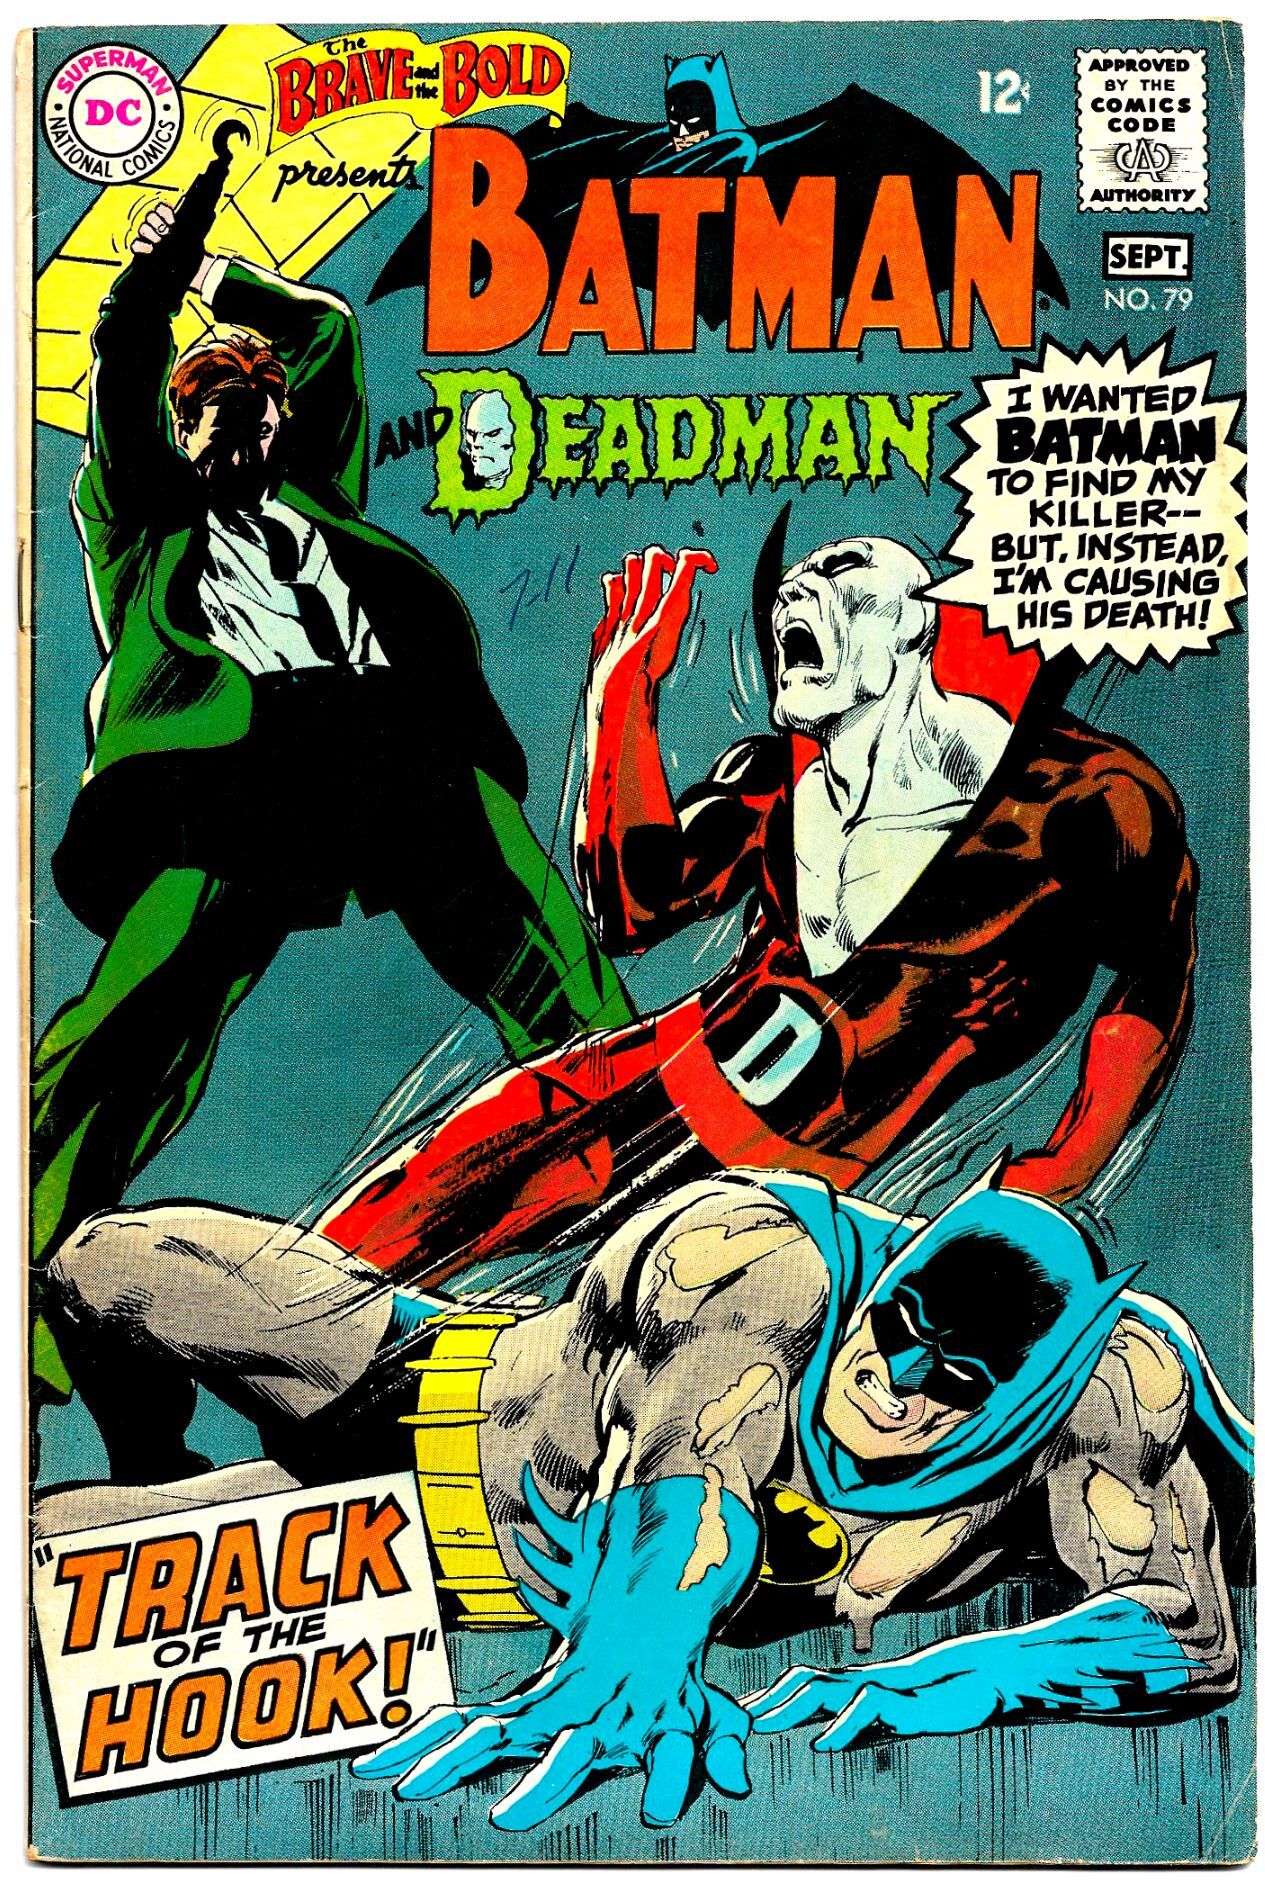 BRAVE AND THE BOLD #79 (Aug1968) 6.5 FN+ NEAL ADAMS on Batman